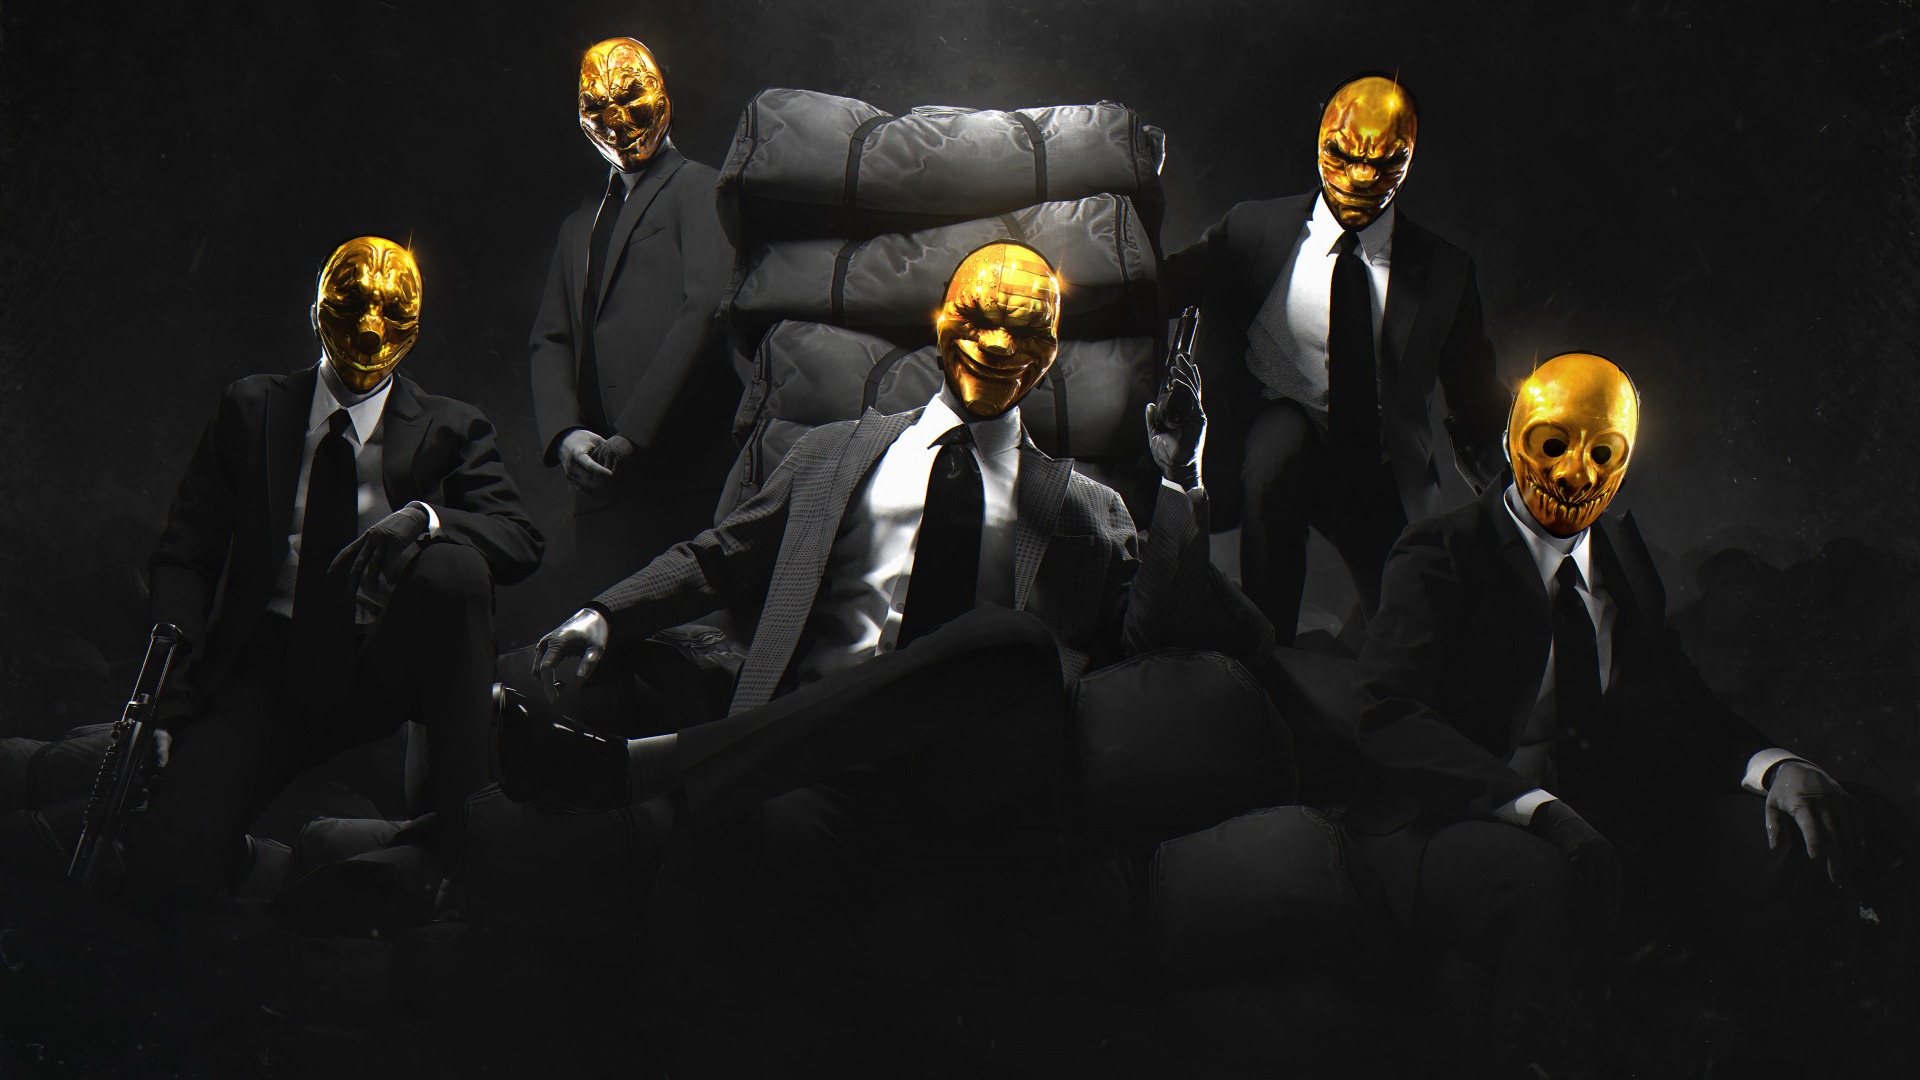 Mafia Payday 2 Payday The Heist Dark Pistol Mask Video Games Gun Suits Suit And Tie Video Game Chara 1920x1080